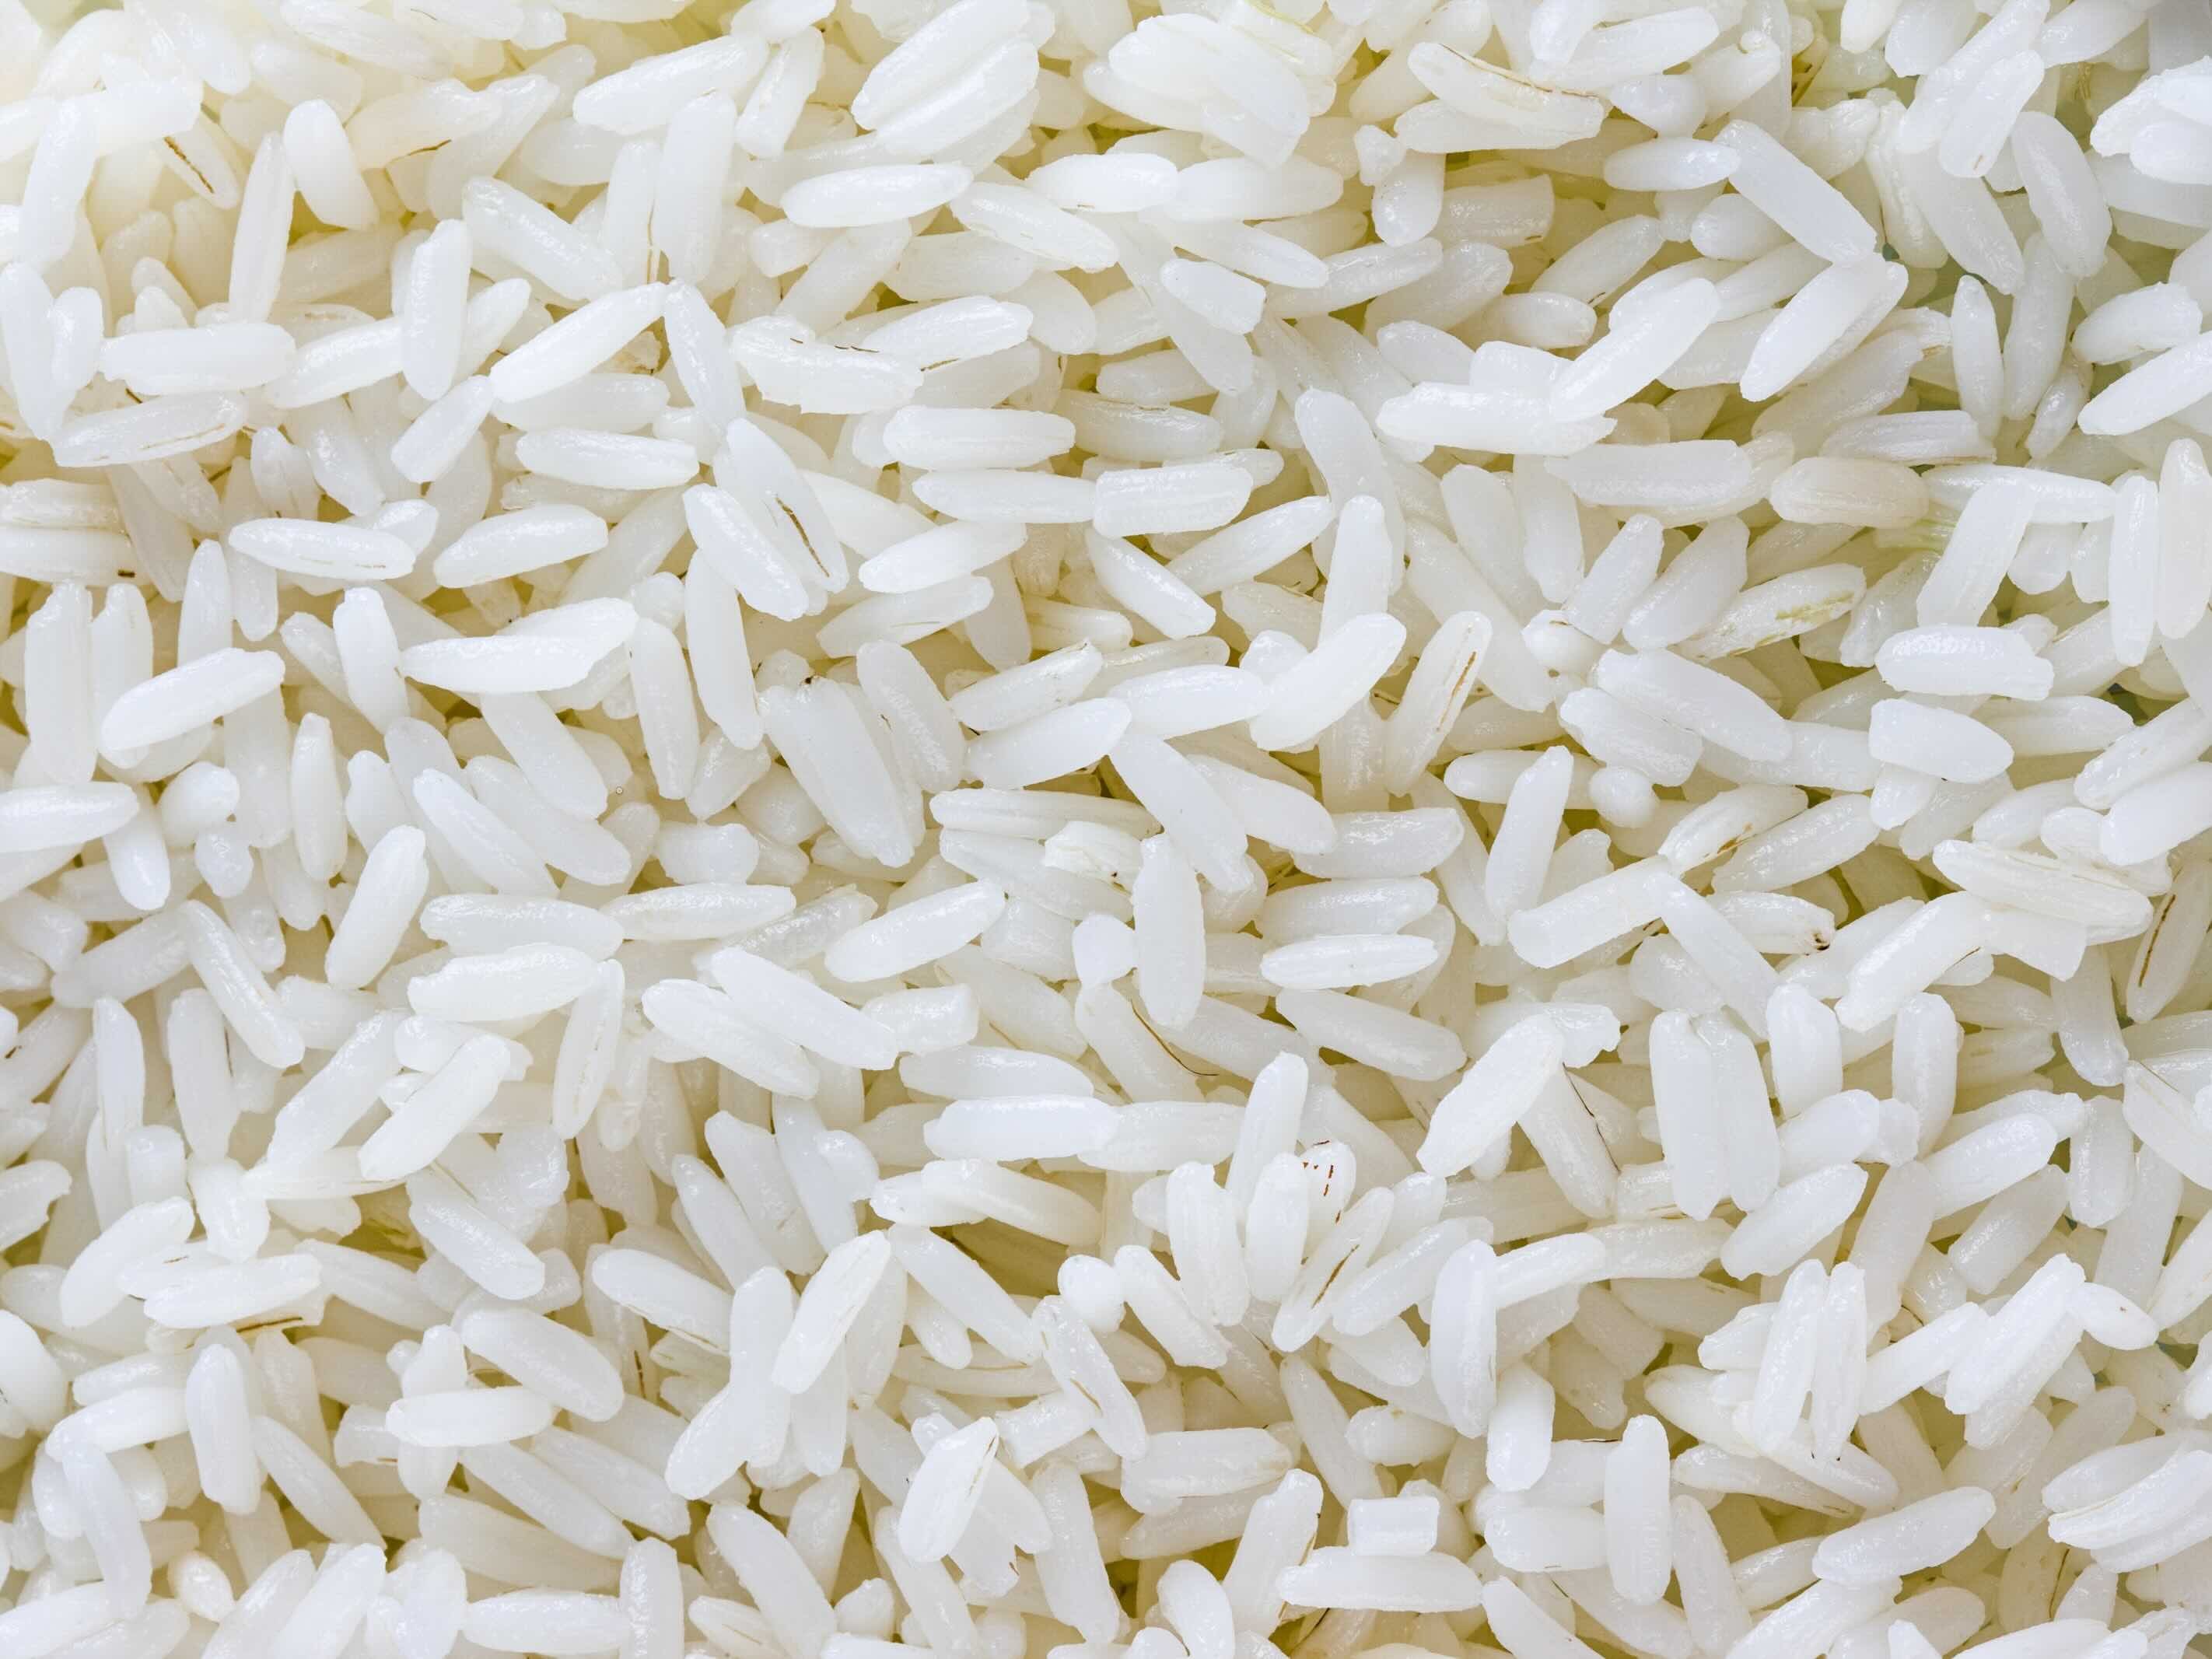 How To Store Rice For A Long Time